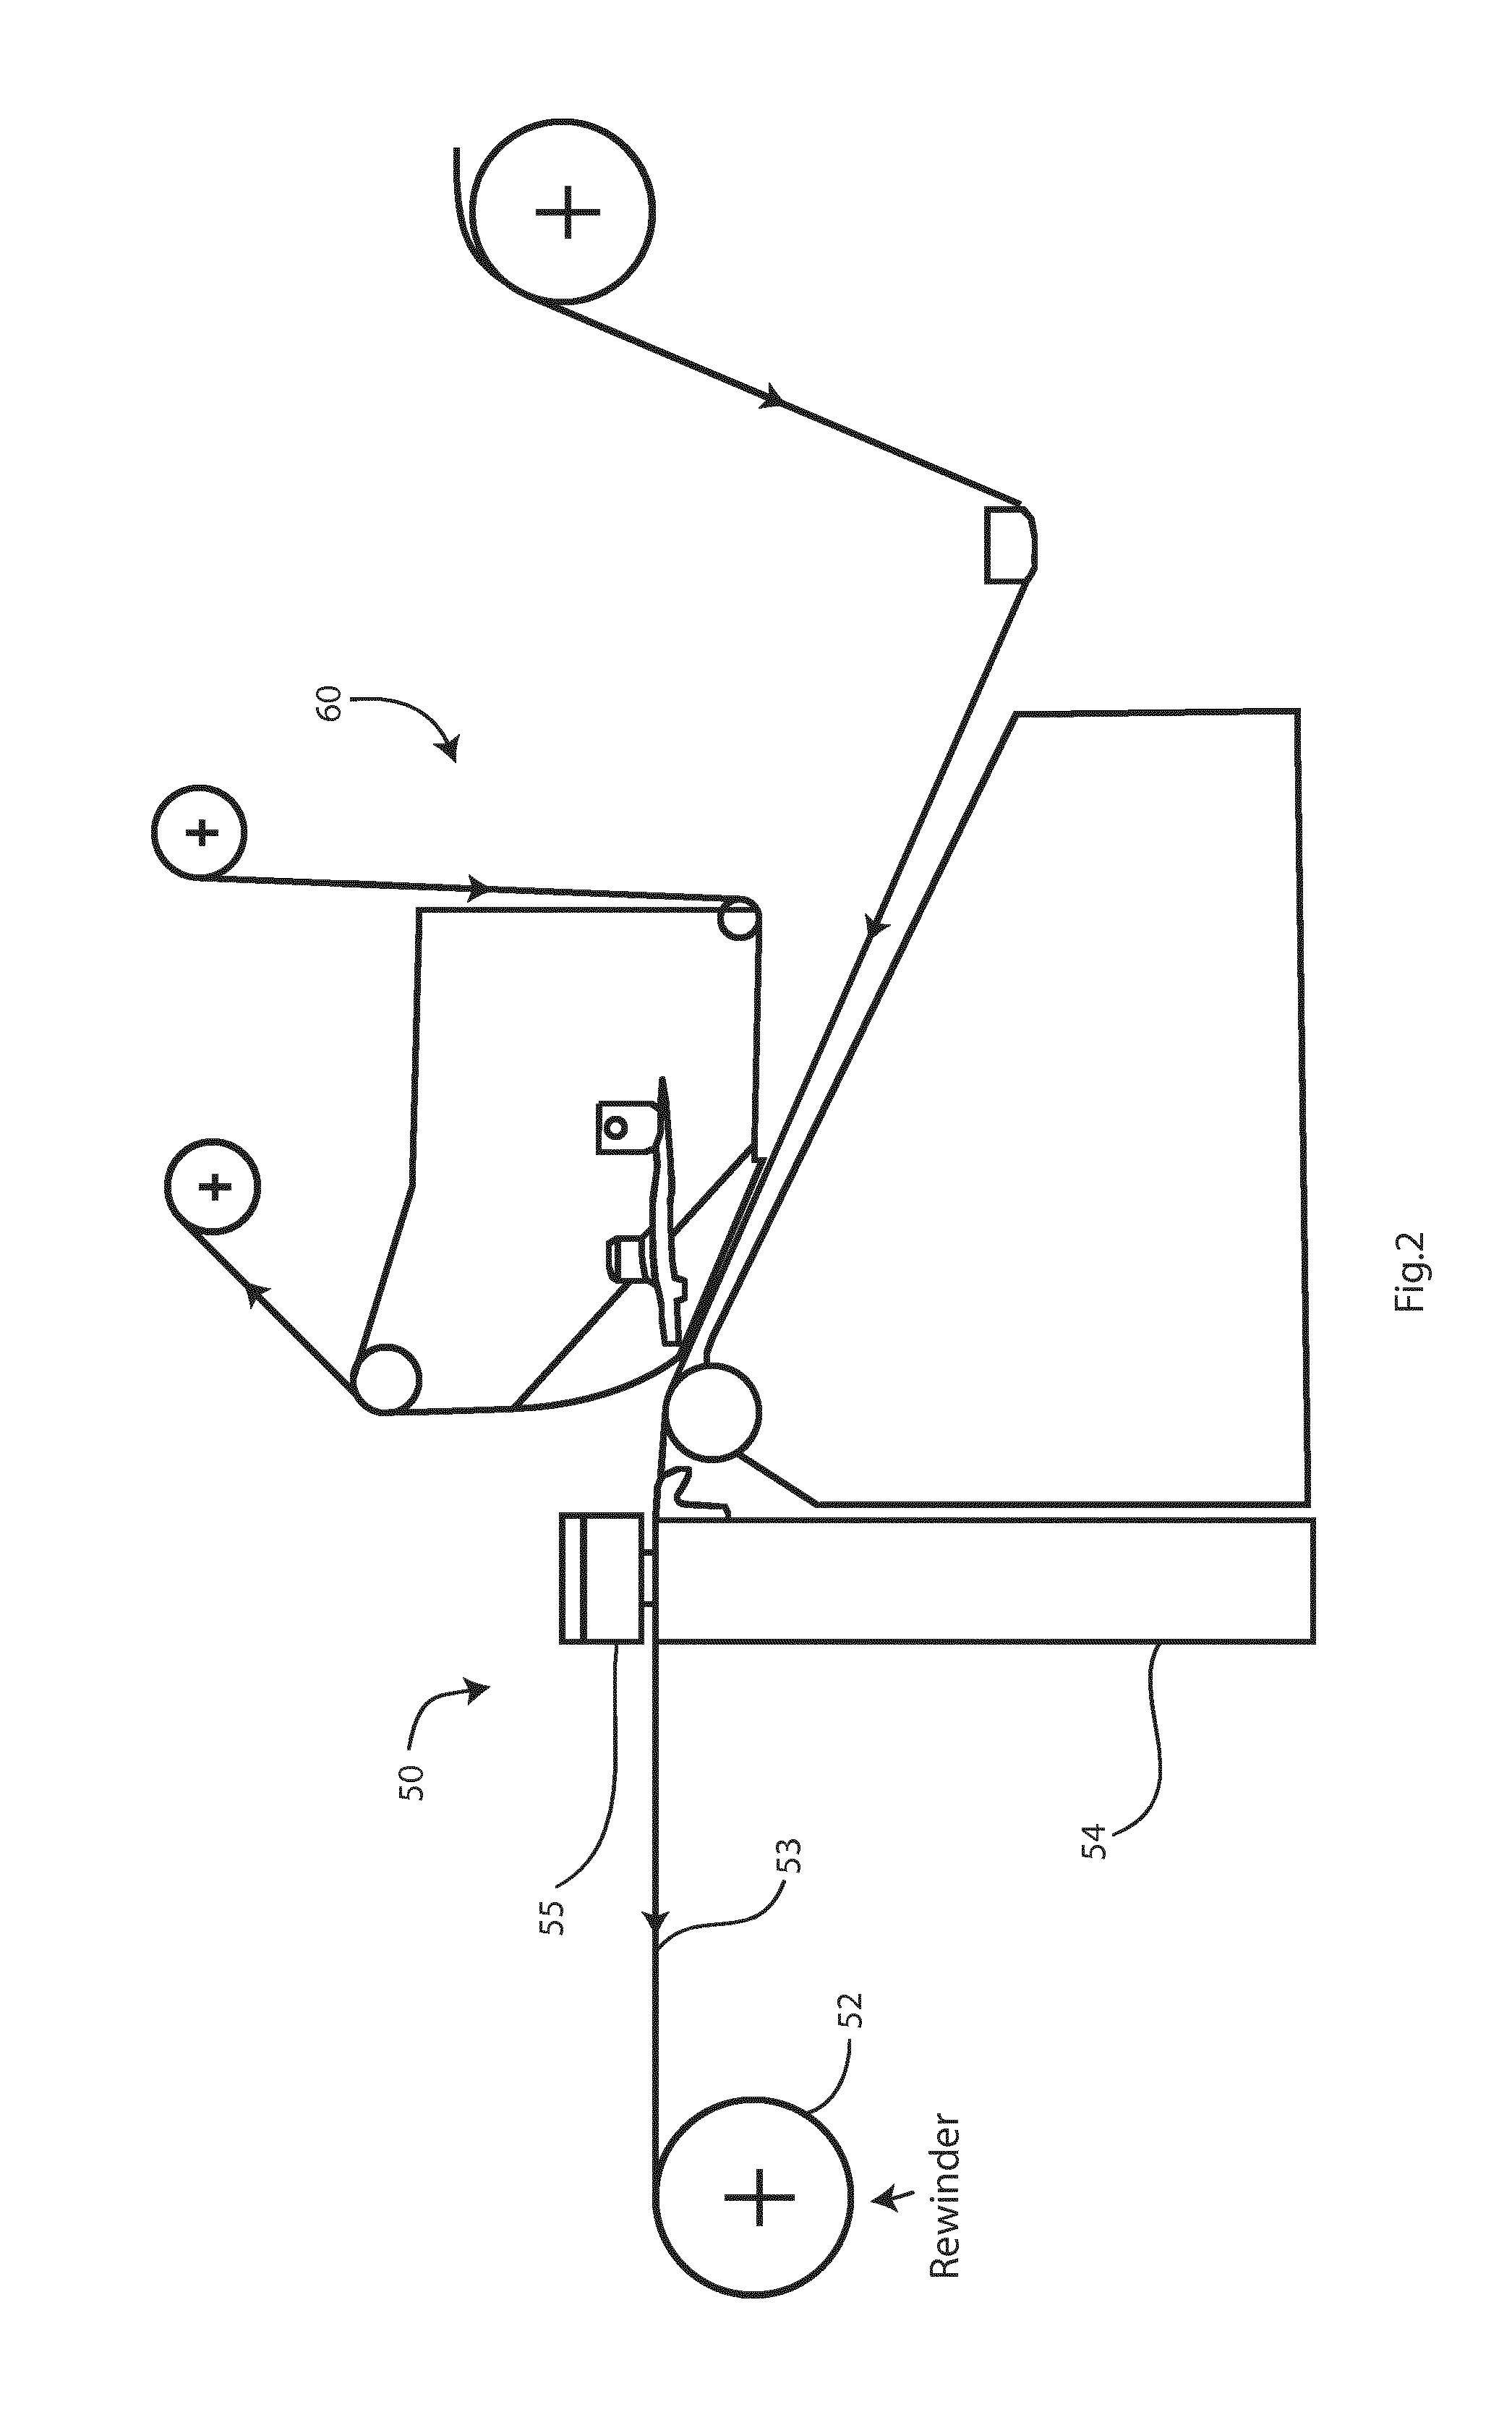 A label inspection system and method